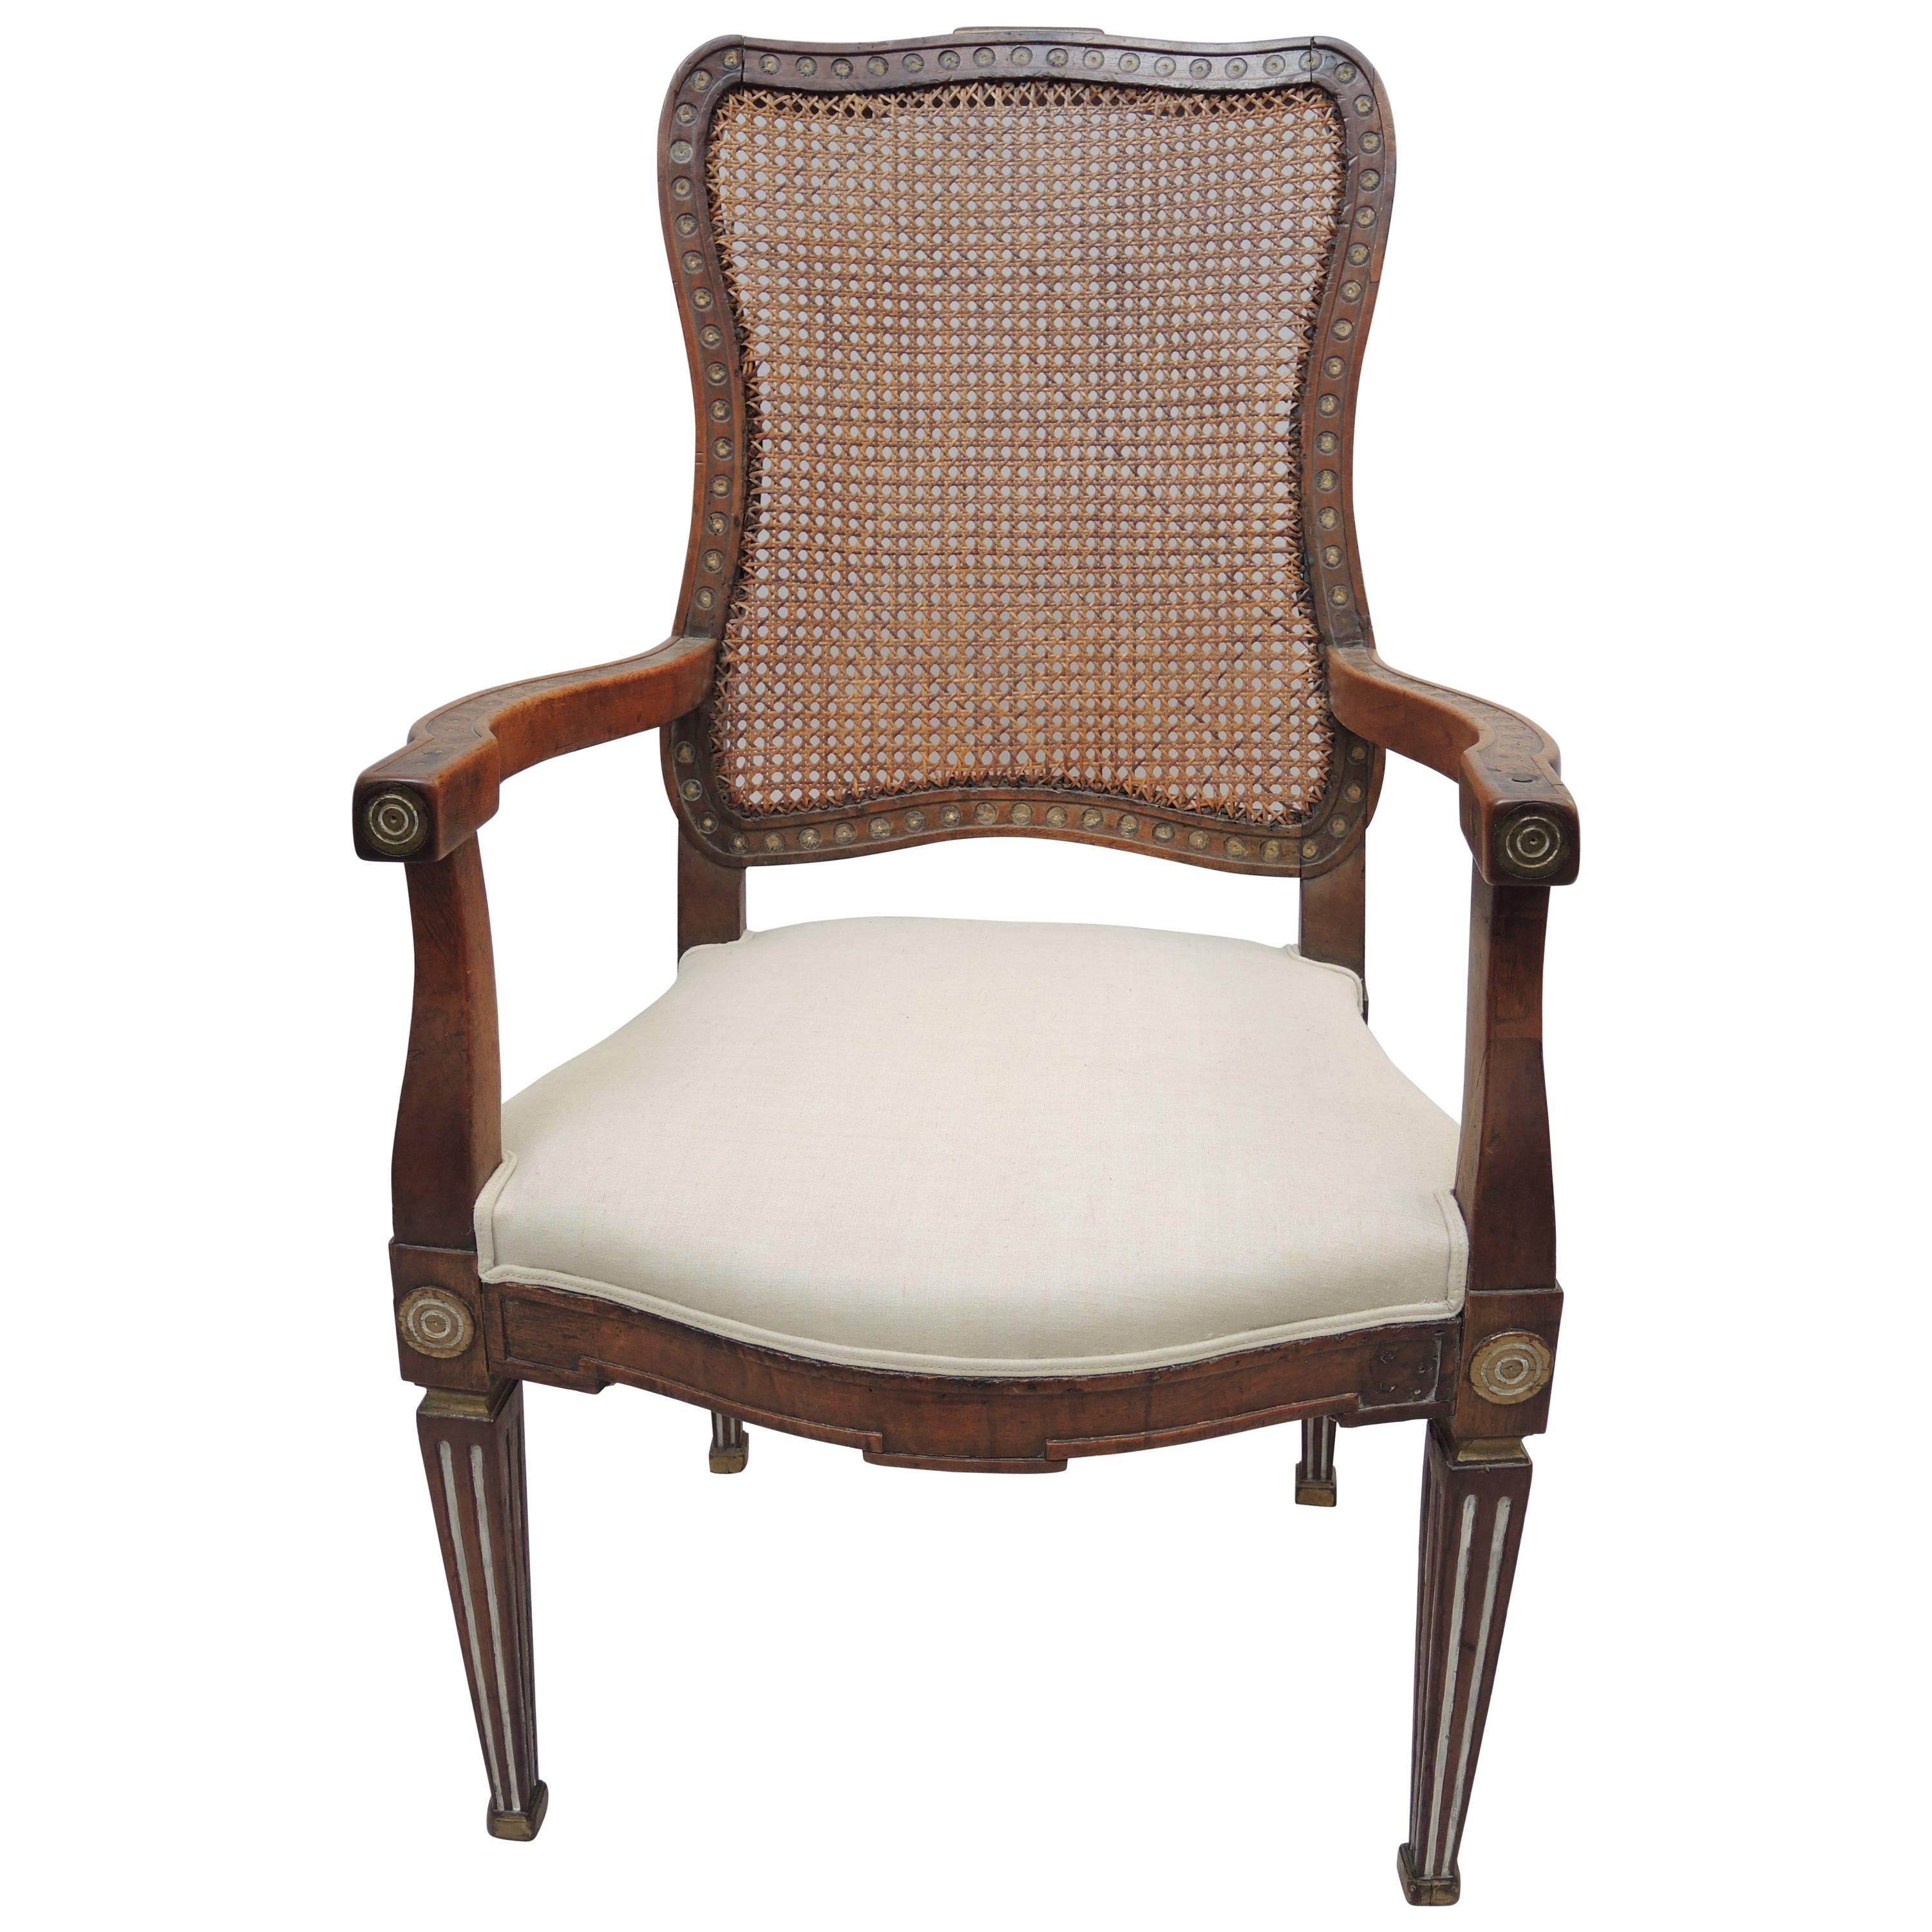 Early 19th Century Dutch Louis XVI Armchair with Cane Woven Back For Sale